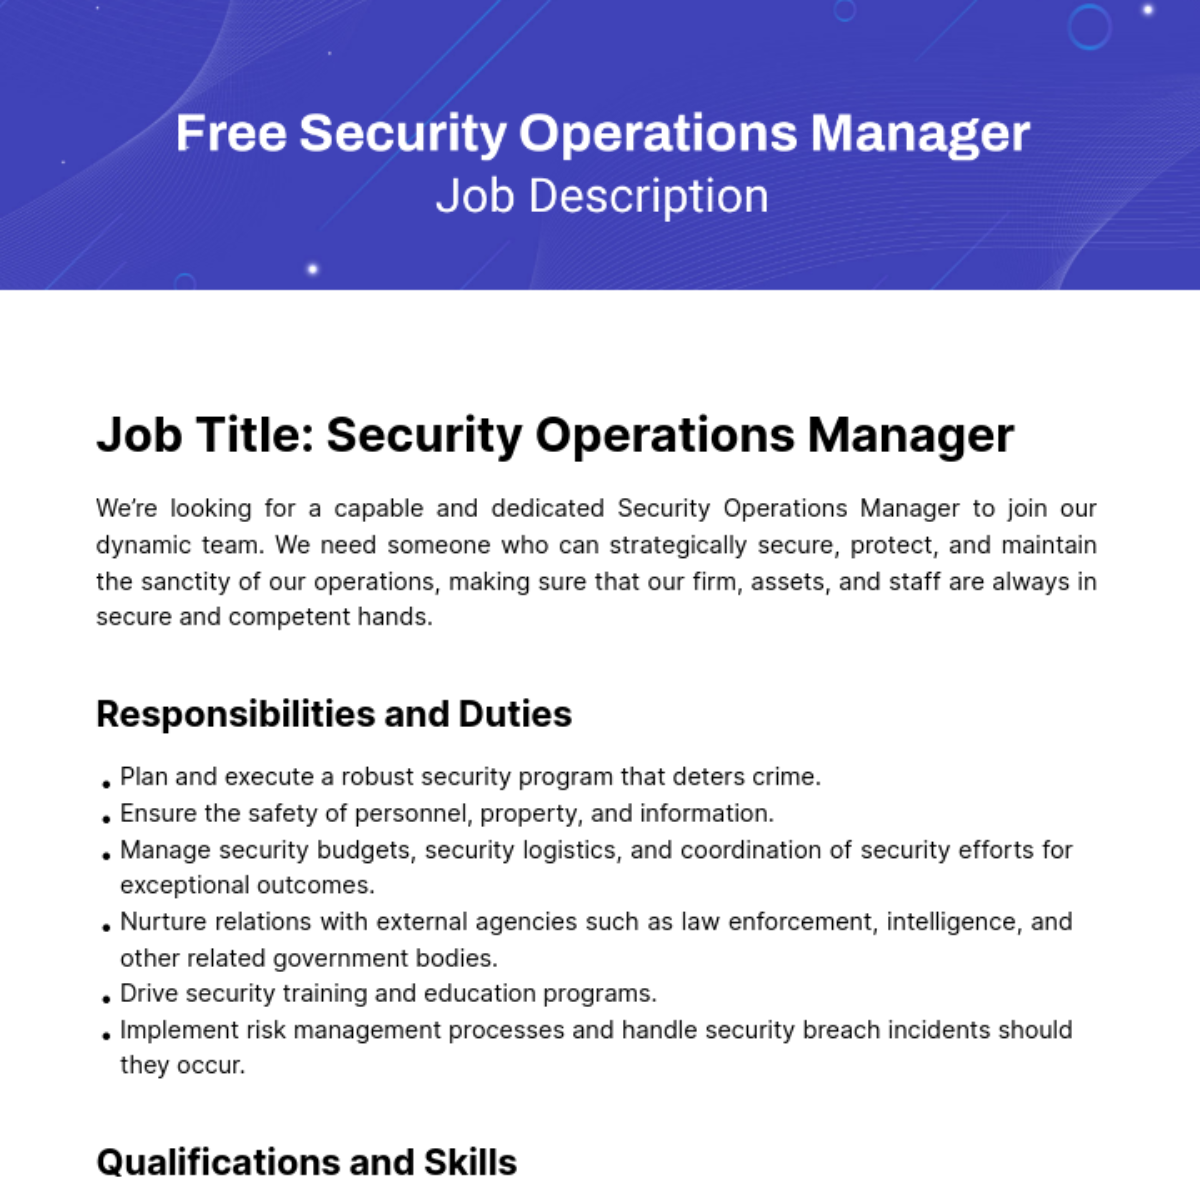 Free Security Operations Manager Job Description Template